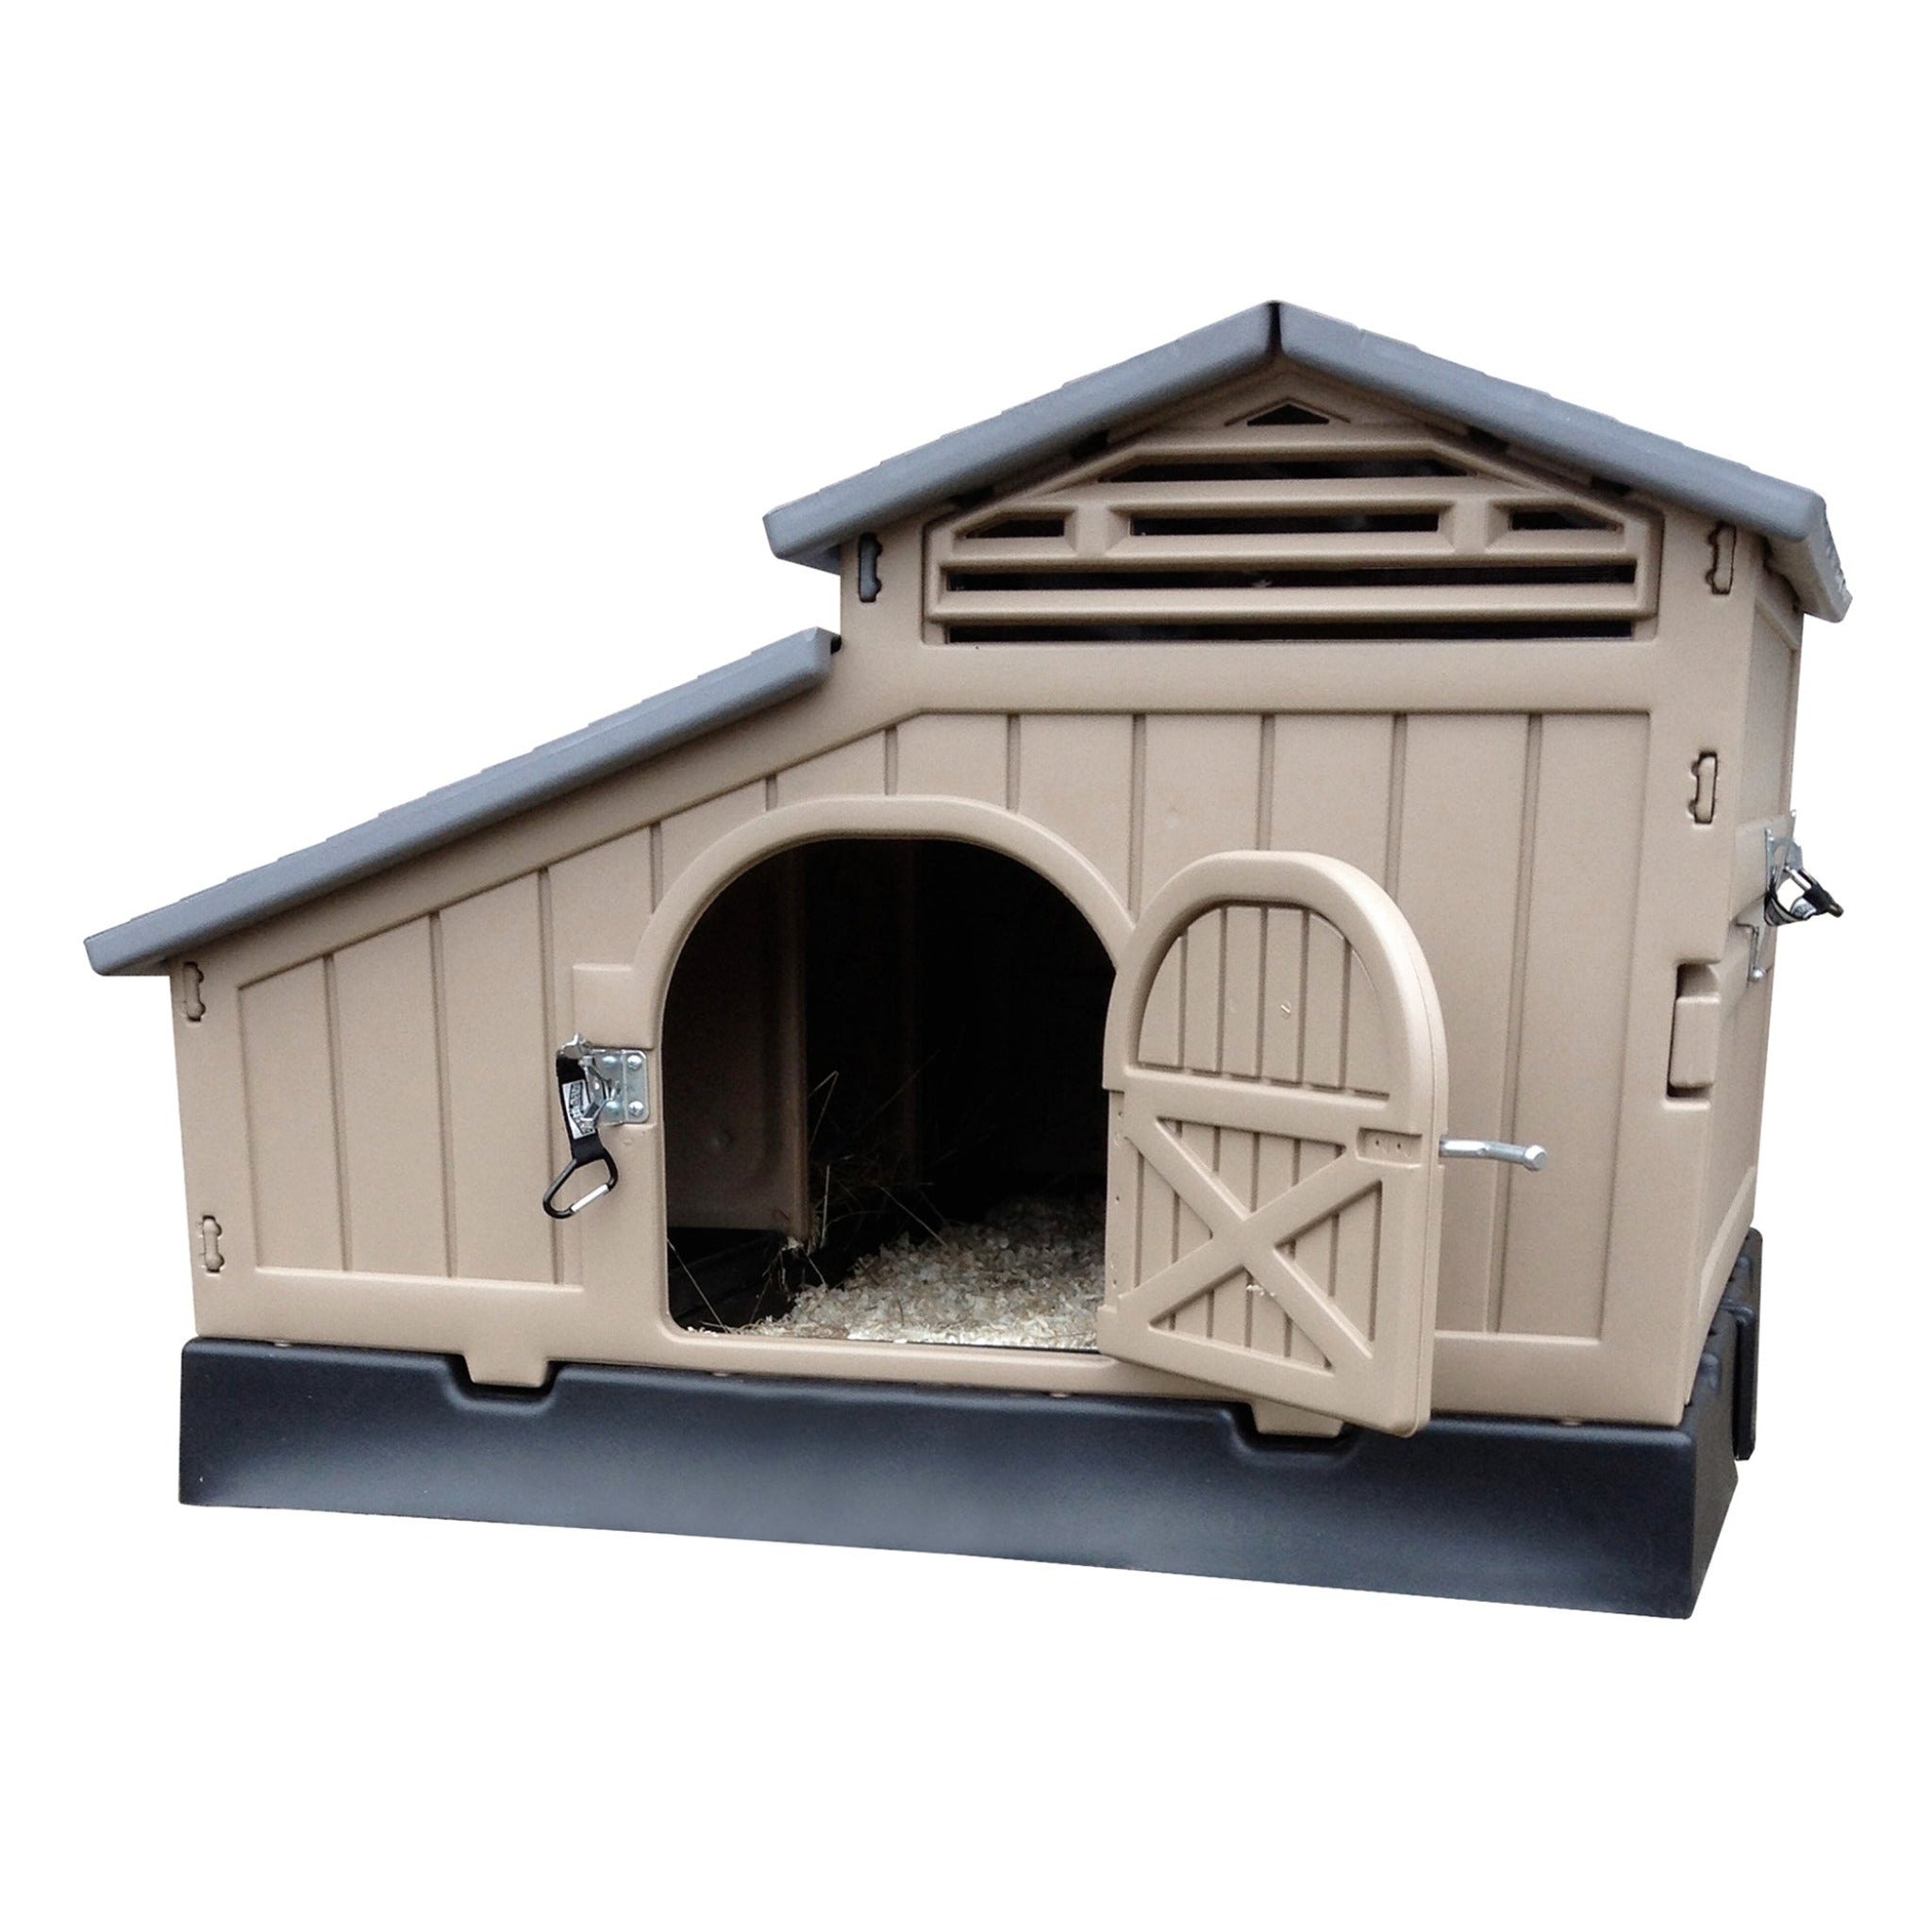 Hatching Time. Standard Formex Chicken Coop with front view and door open